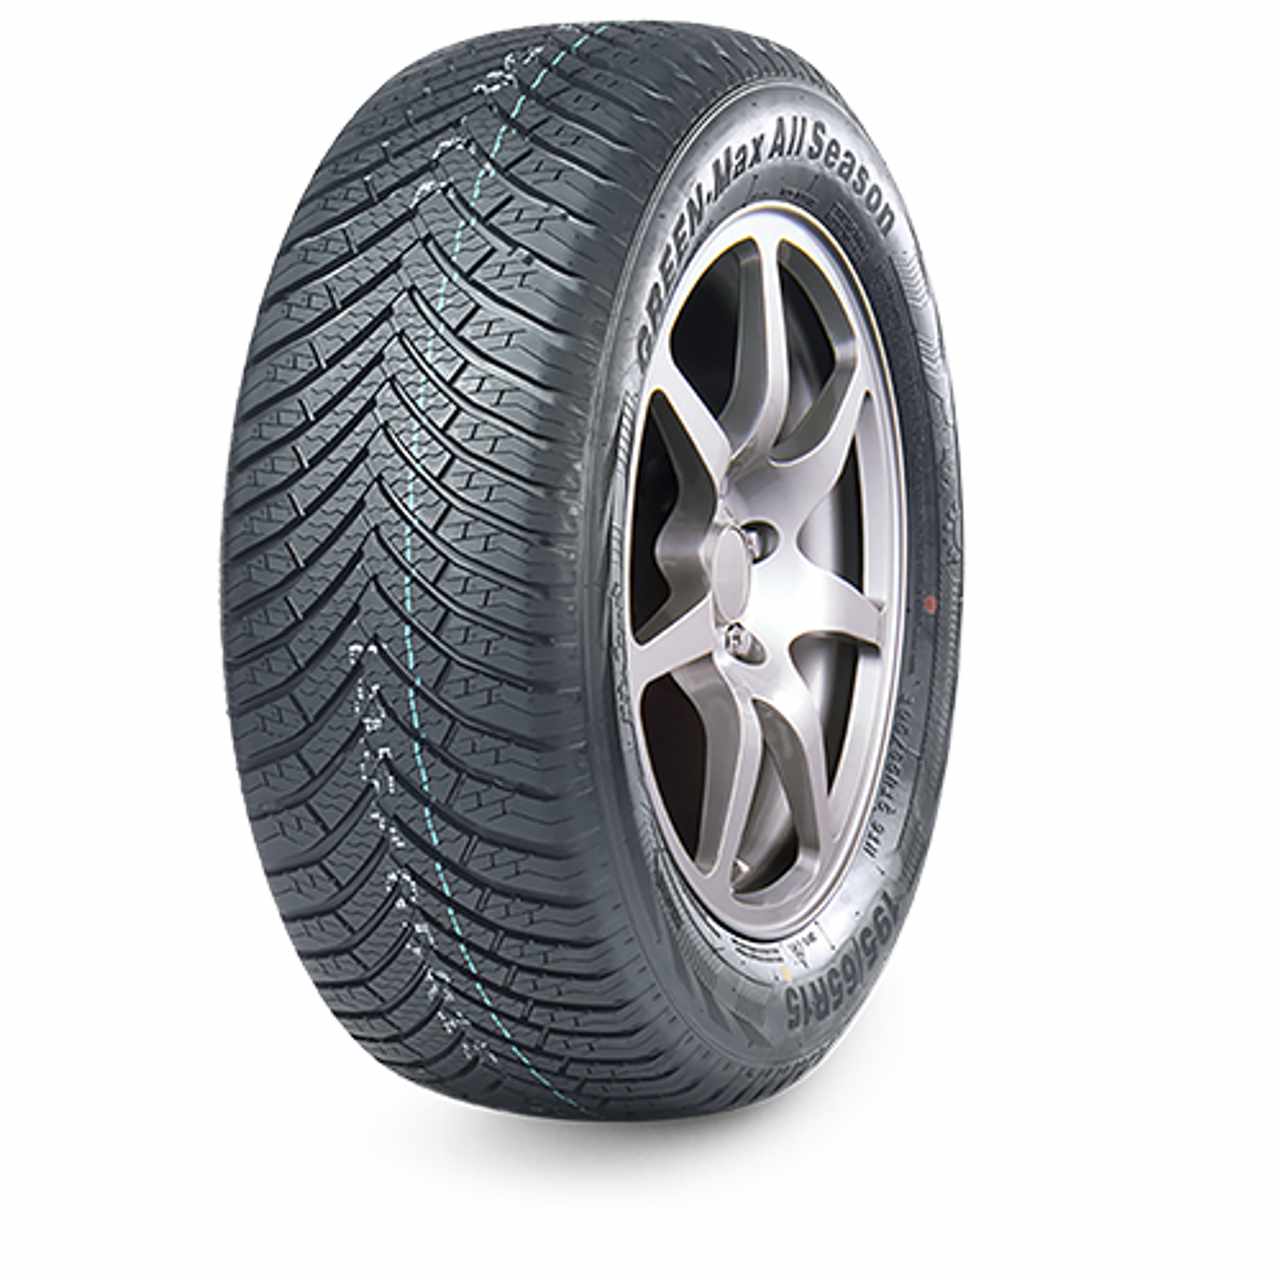 LINGLONG GREEN-MAX ALL SEASON 175/70R13 82T BSW